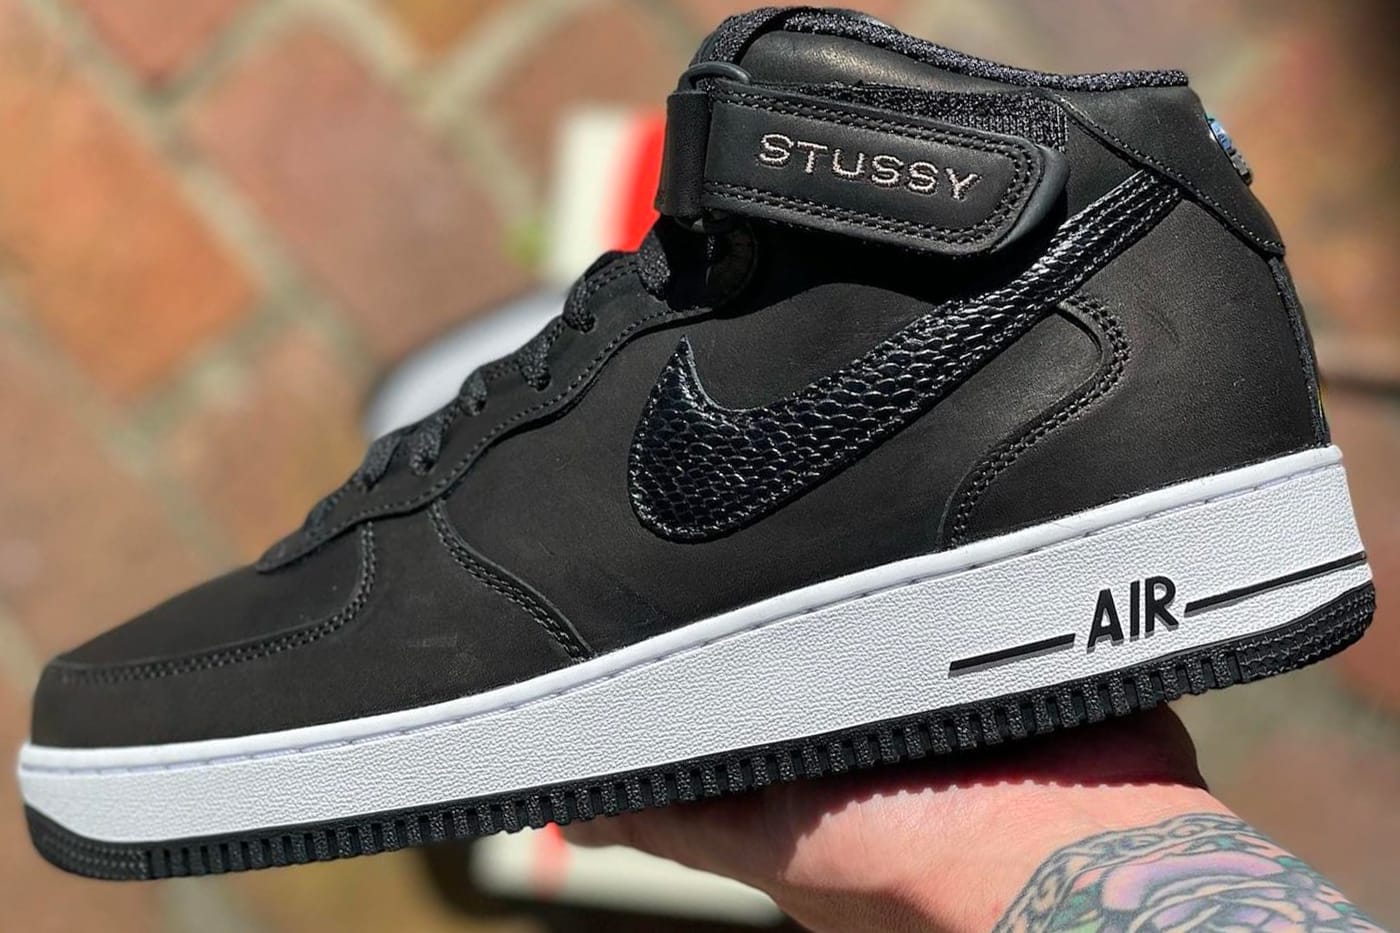 stussy air force 1 snkrs